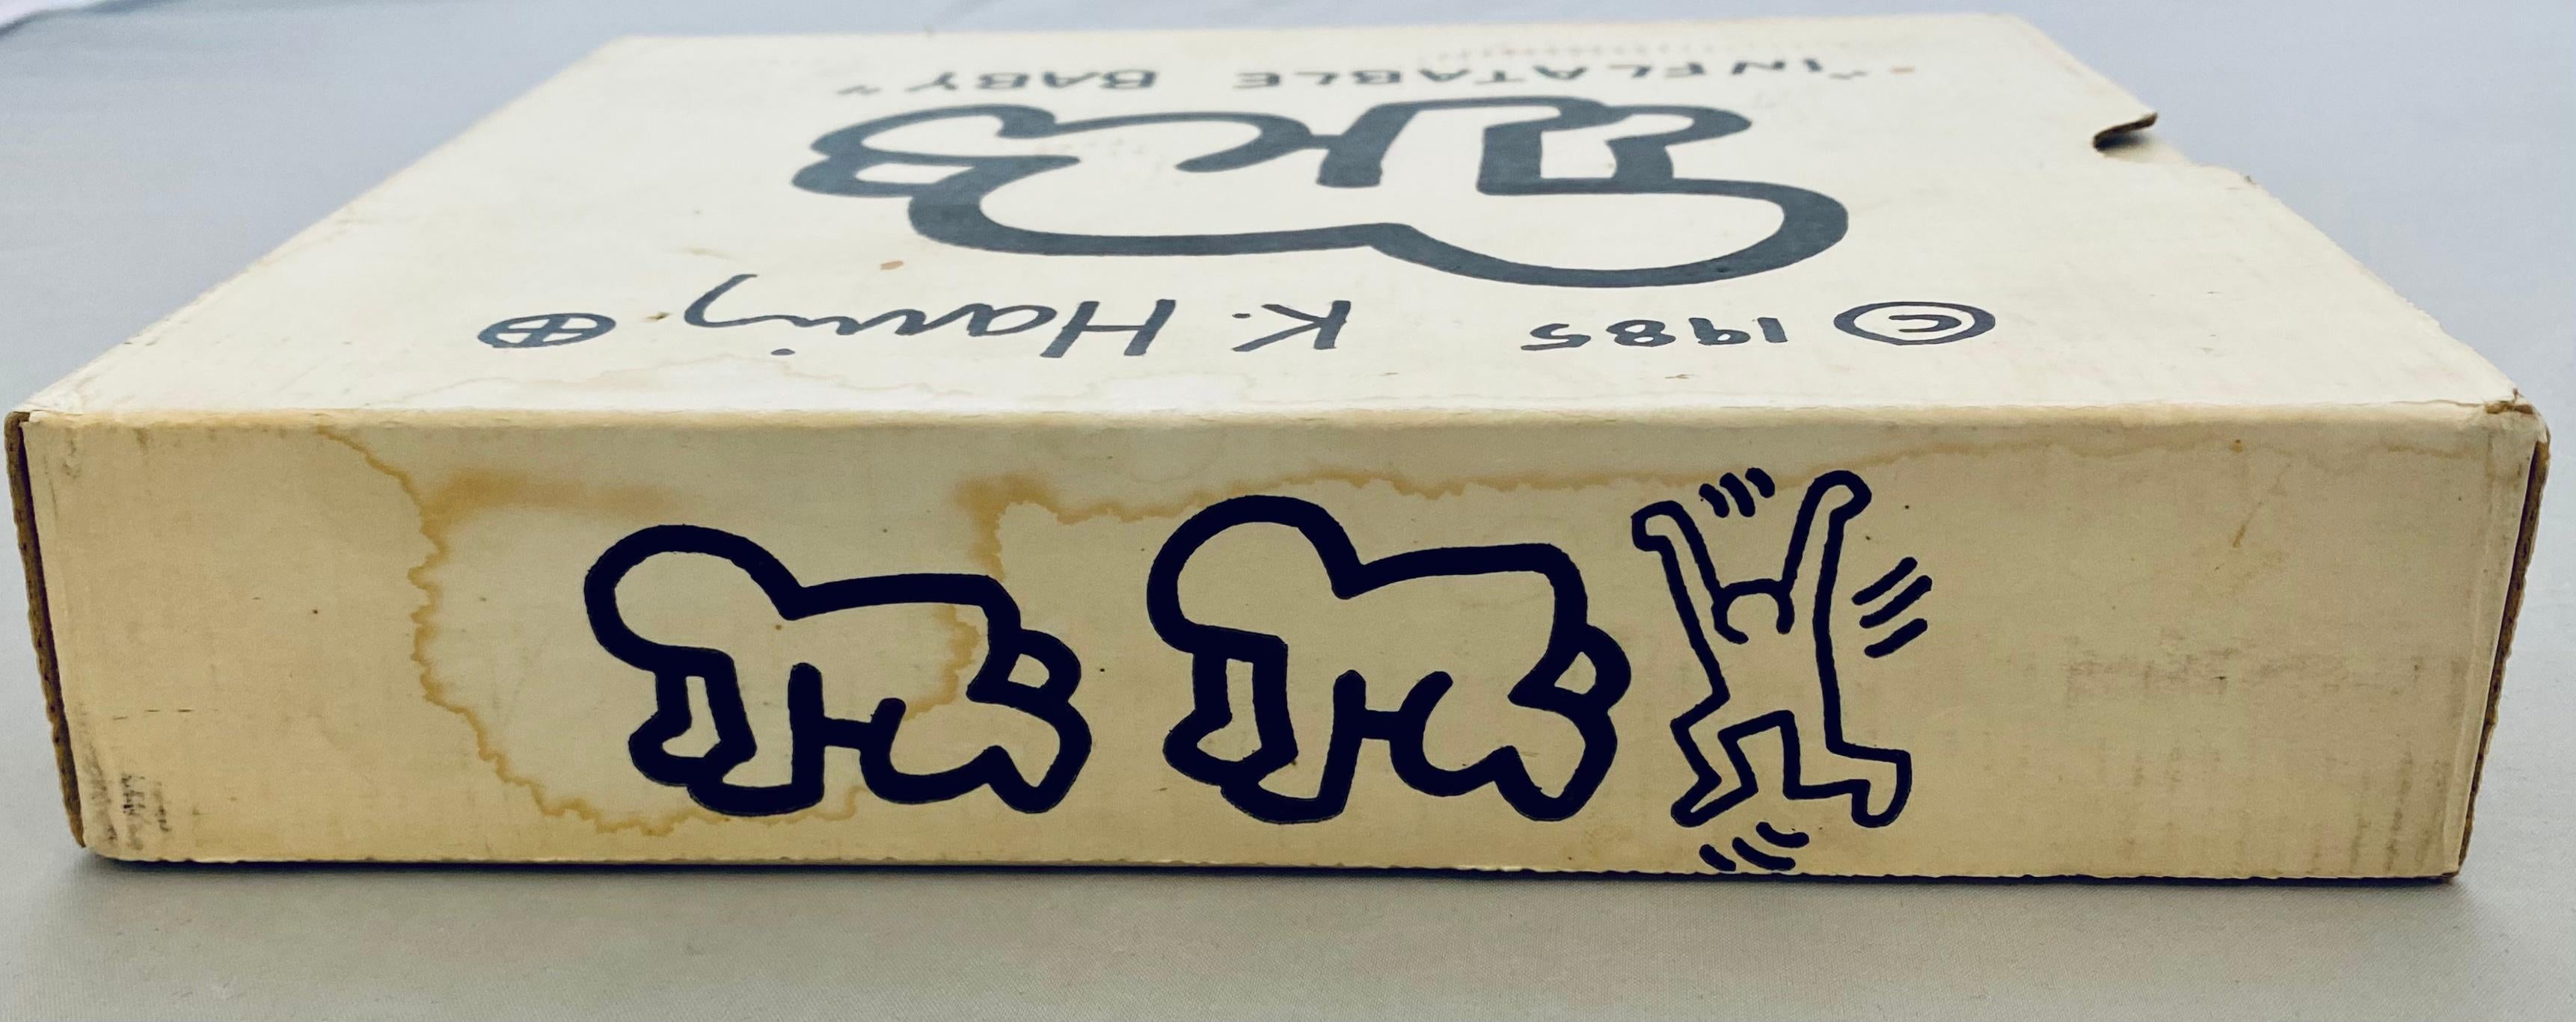 Keith Haring Inflatable Baby box (Keith Haring Pop Shop 1980s) 3